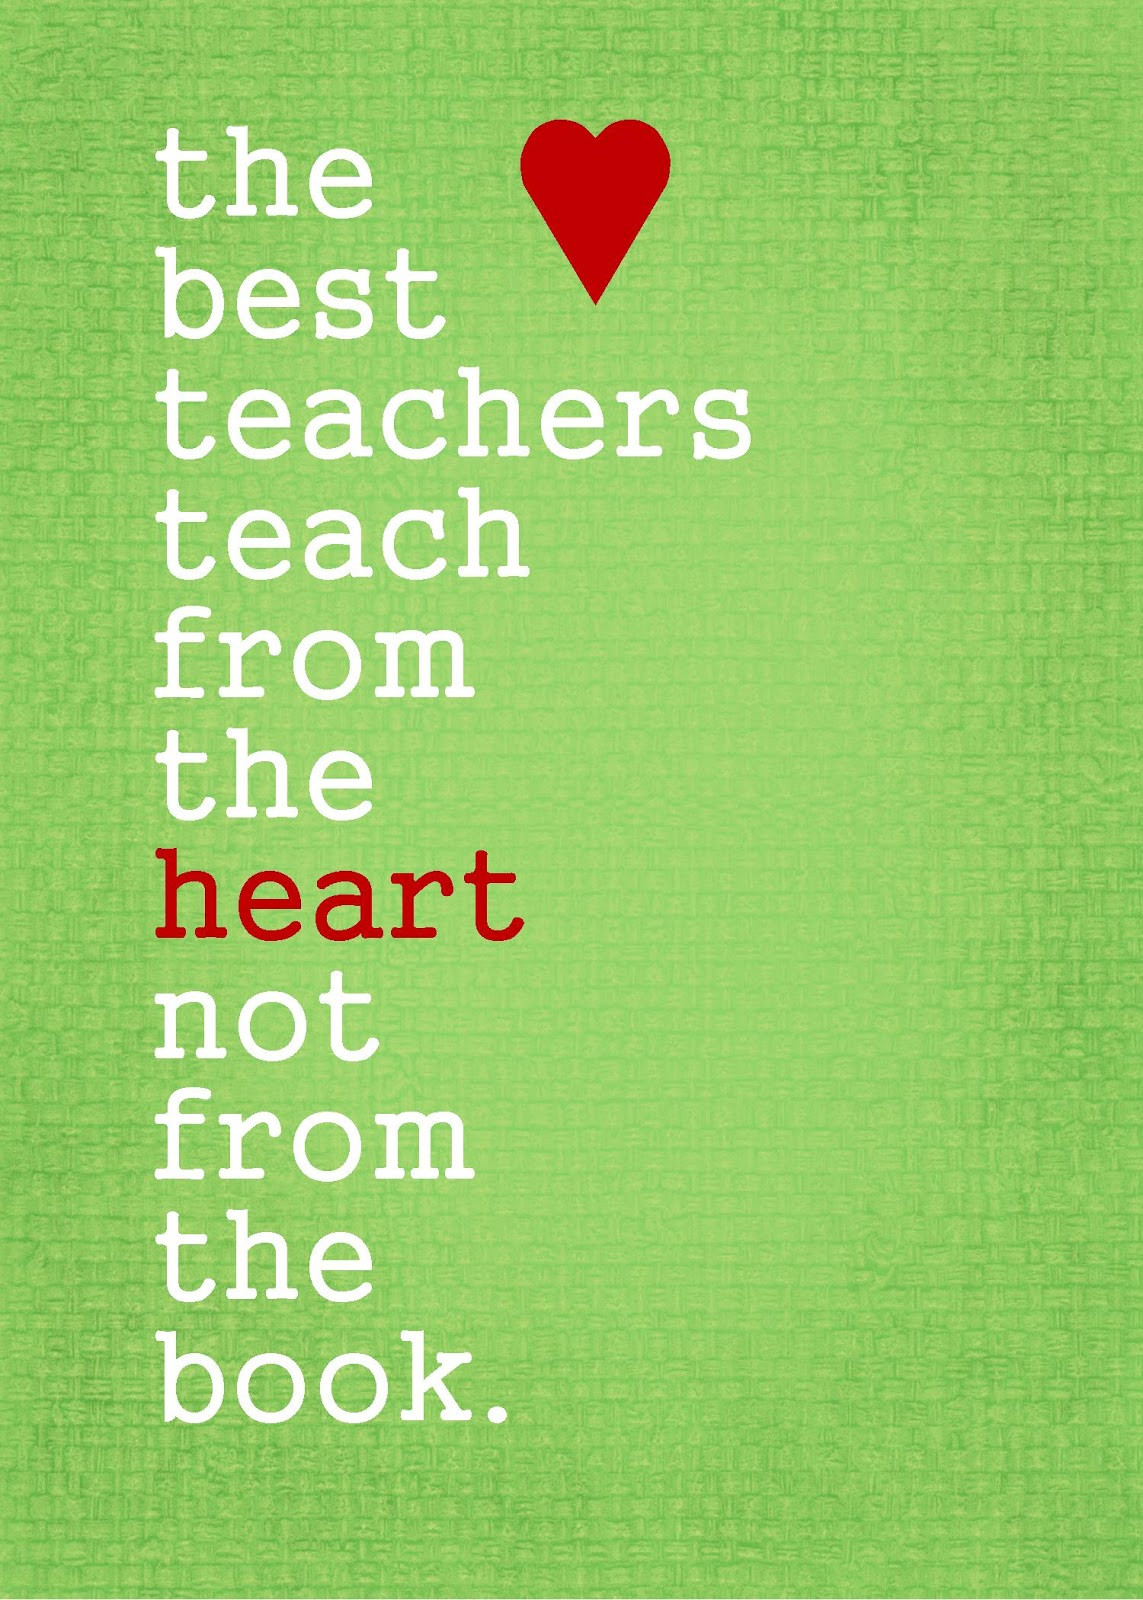 Educational Quotes For Teachers
 Full of Great Ideas Teacher Gifts Free printable quotes